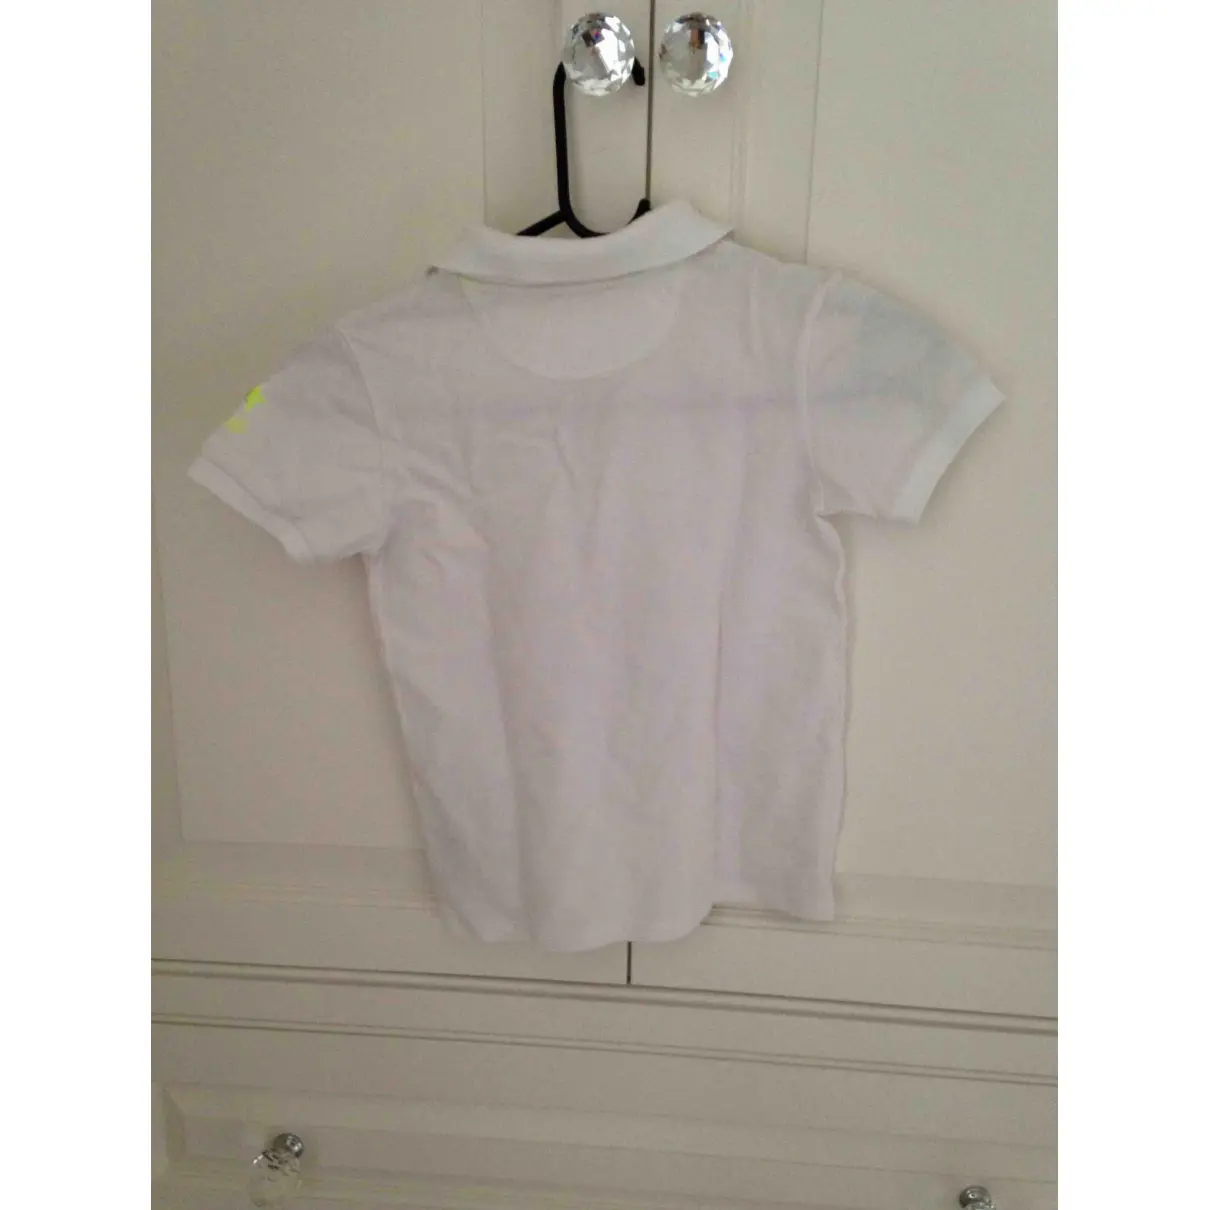 Gucci T-shirt for sale